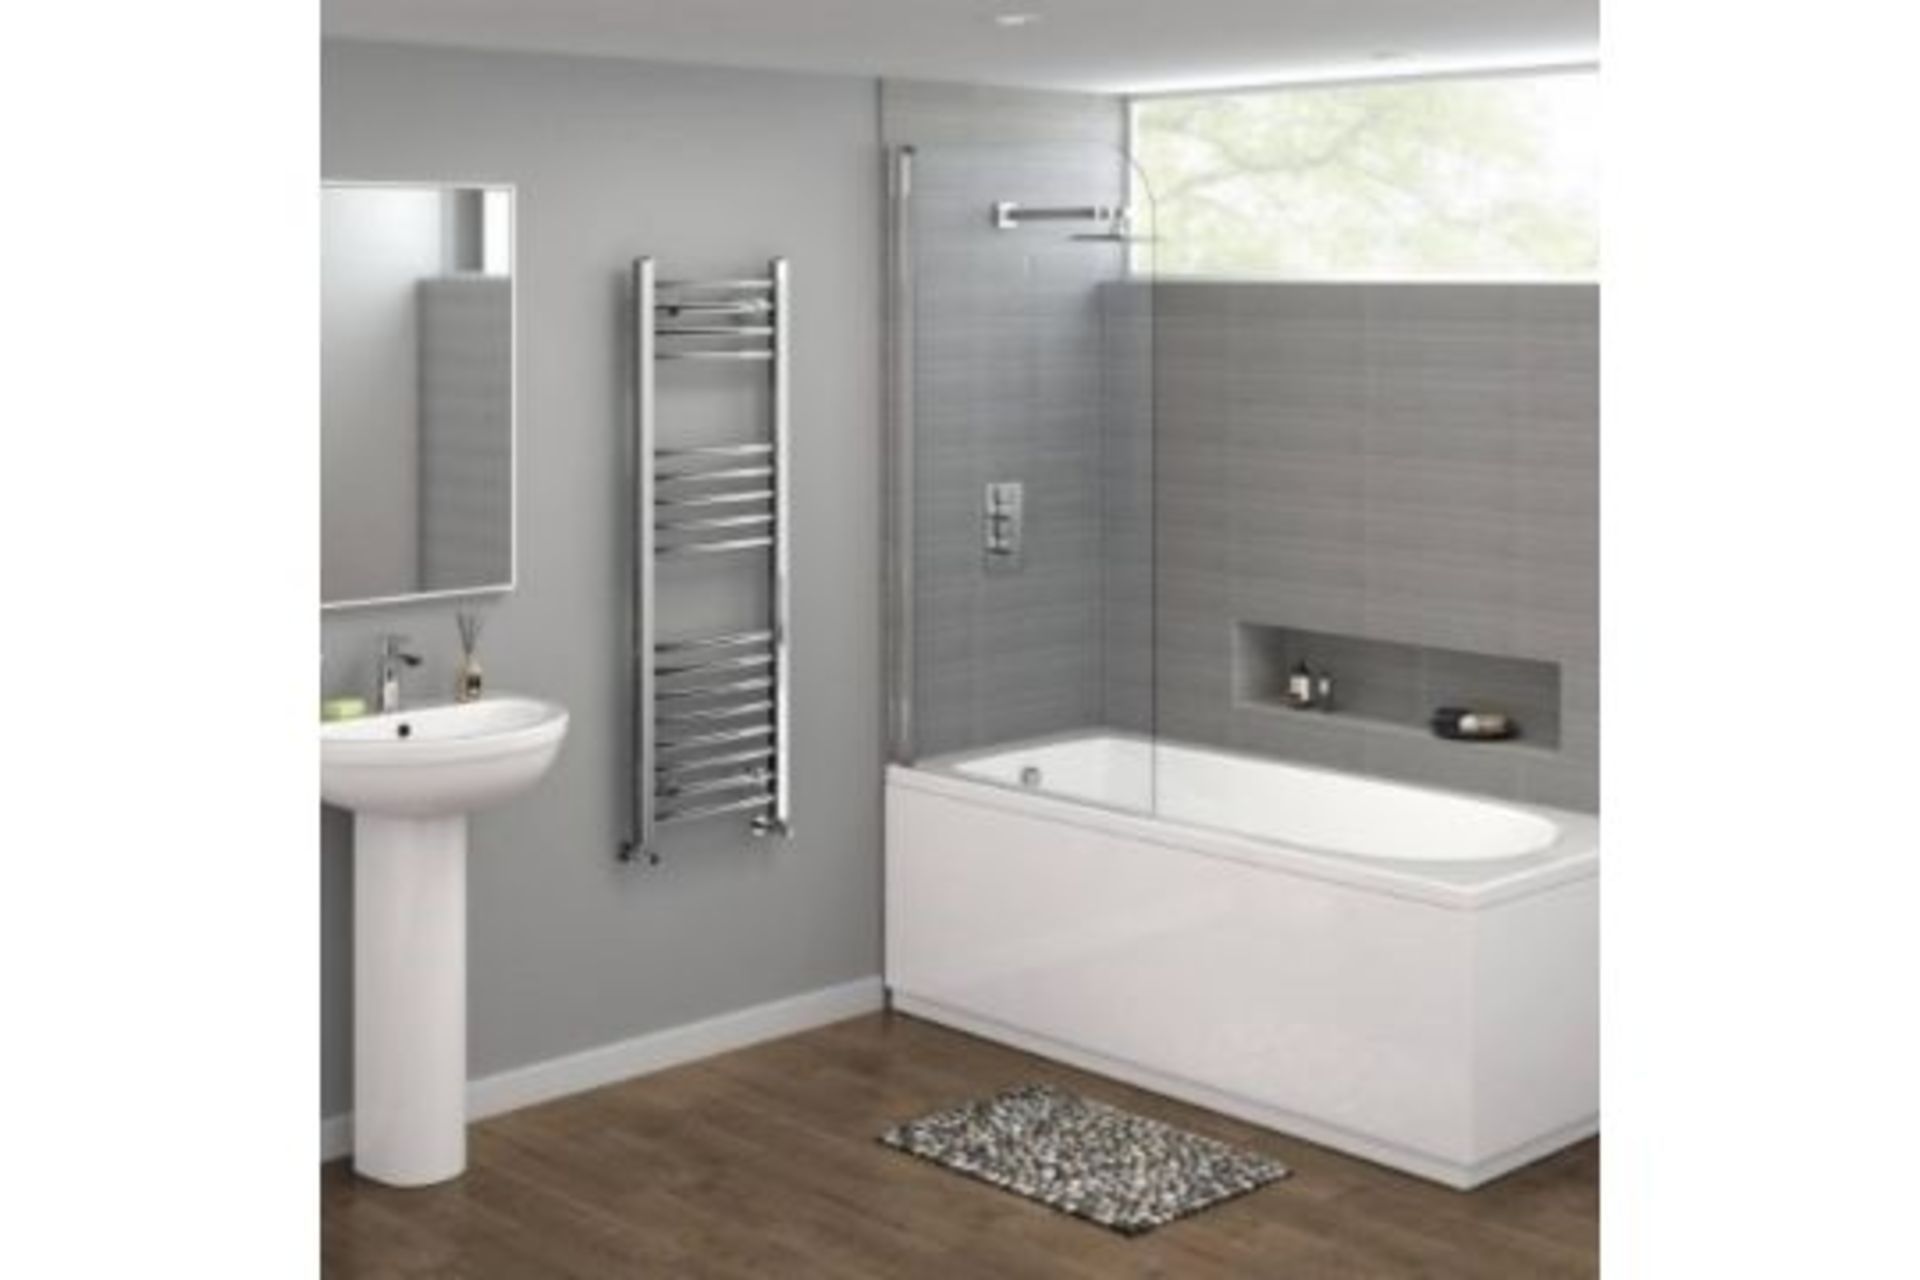 New 1200x400mm - 20mm Tubes - Chrome Curved Rail Ladder Towel Radiator. Nc1200400.Our Nancy ... New - Image 2 of 2